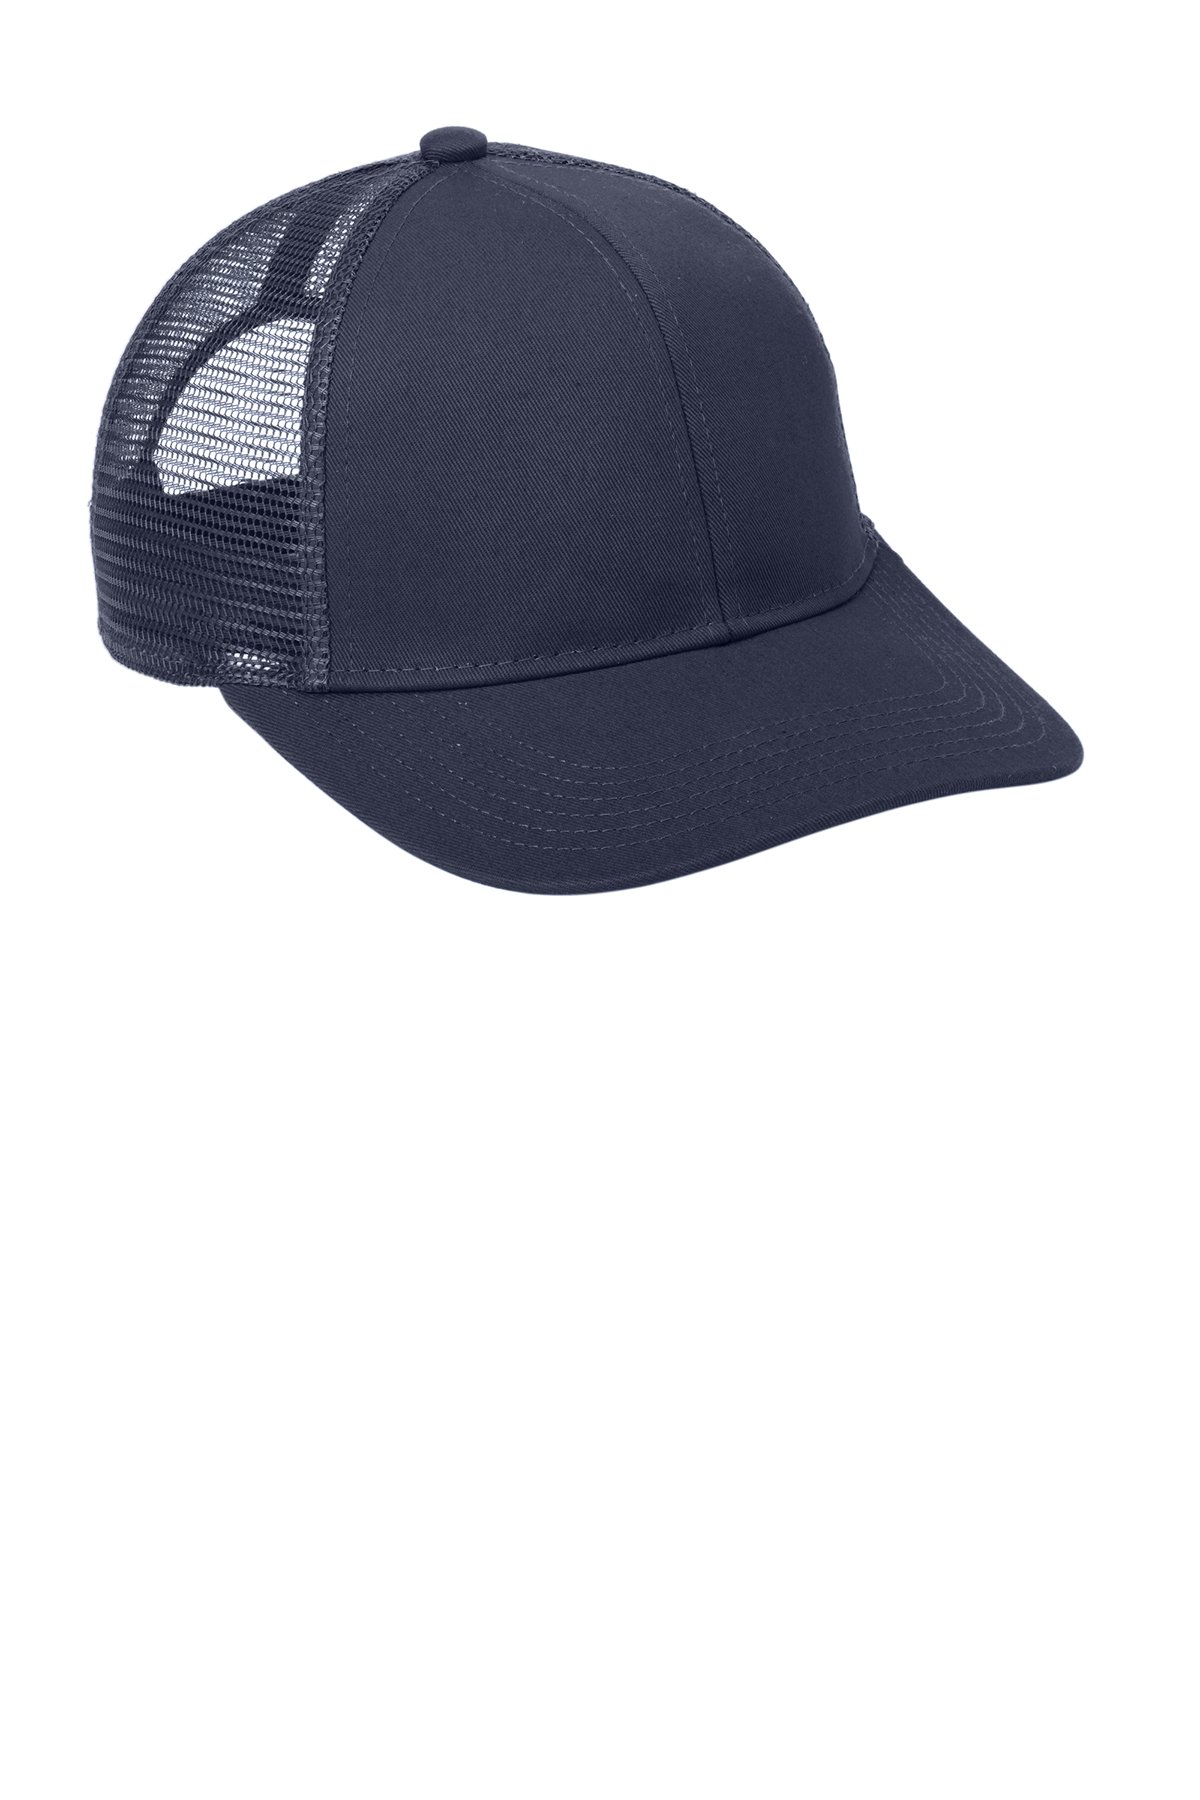 Port Authority ® Adjustable Mesh Back Cap | Product | Company Casuals